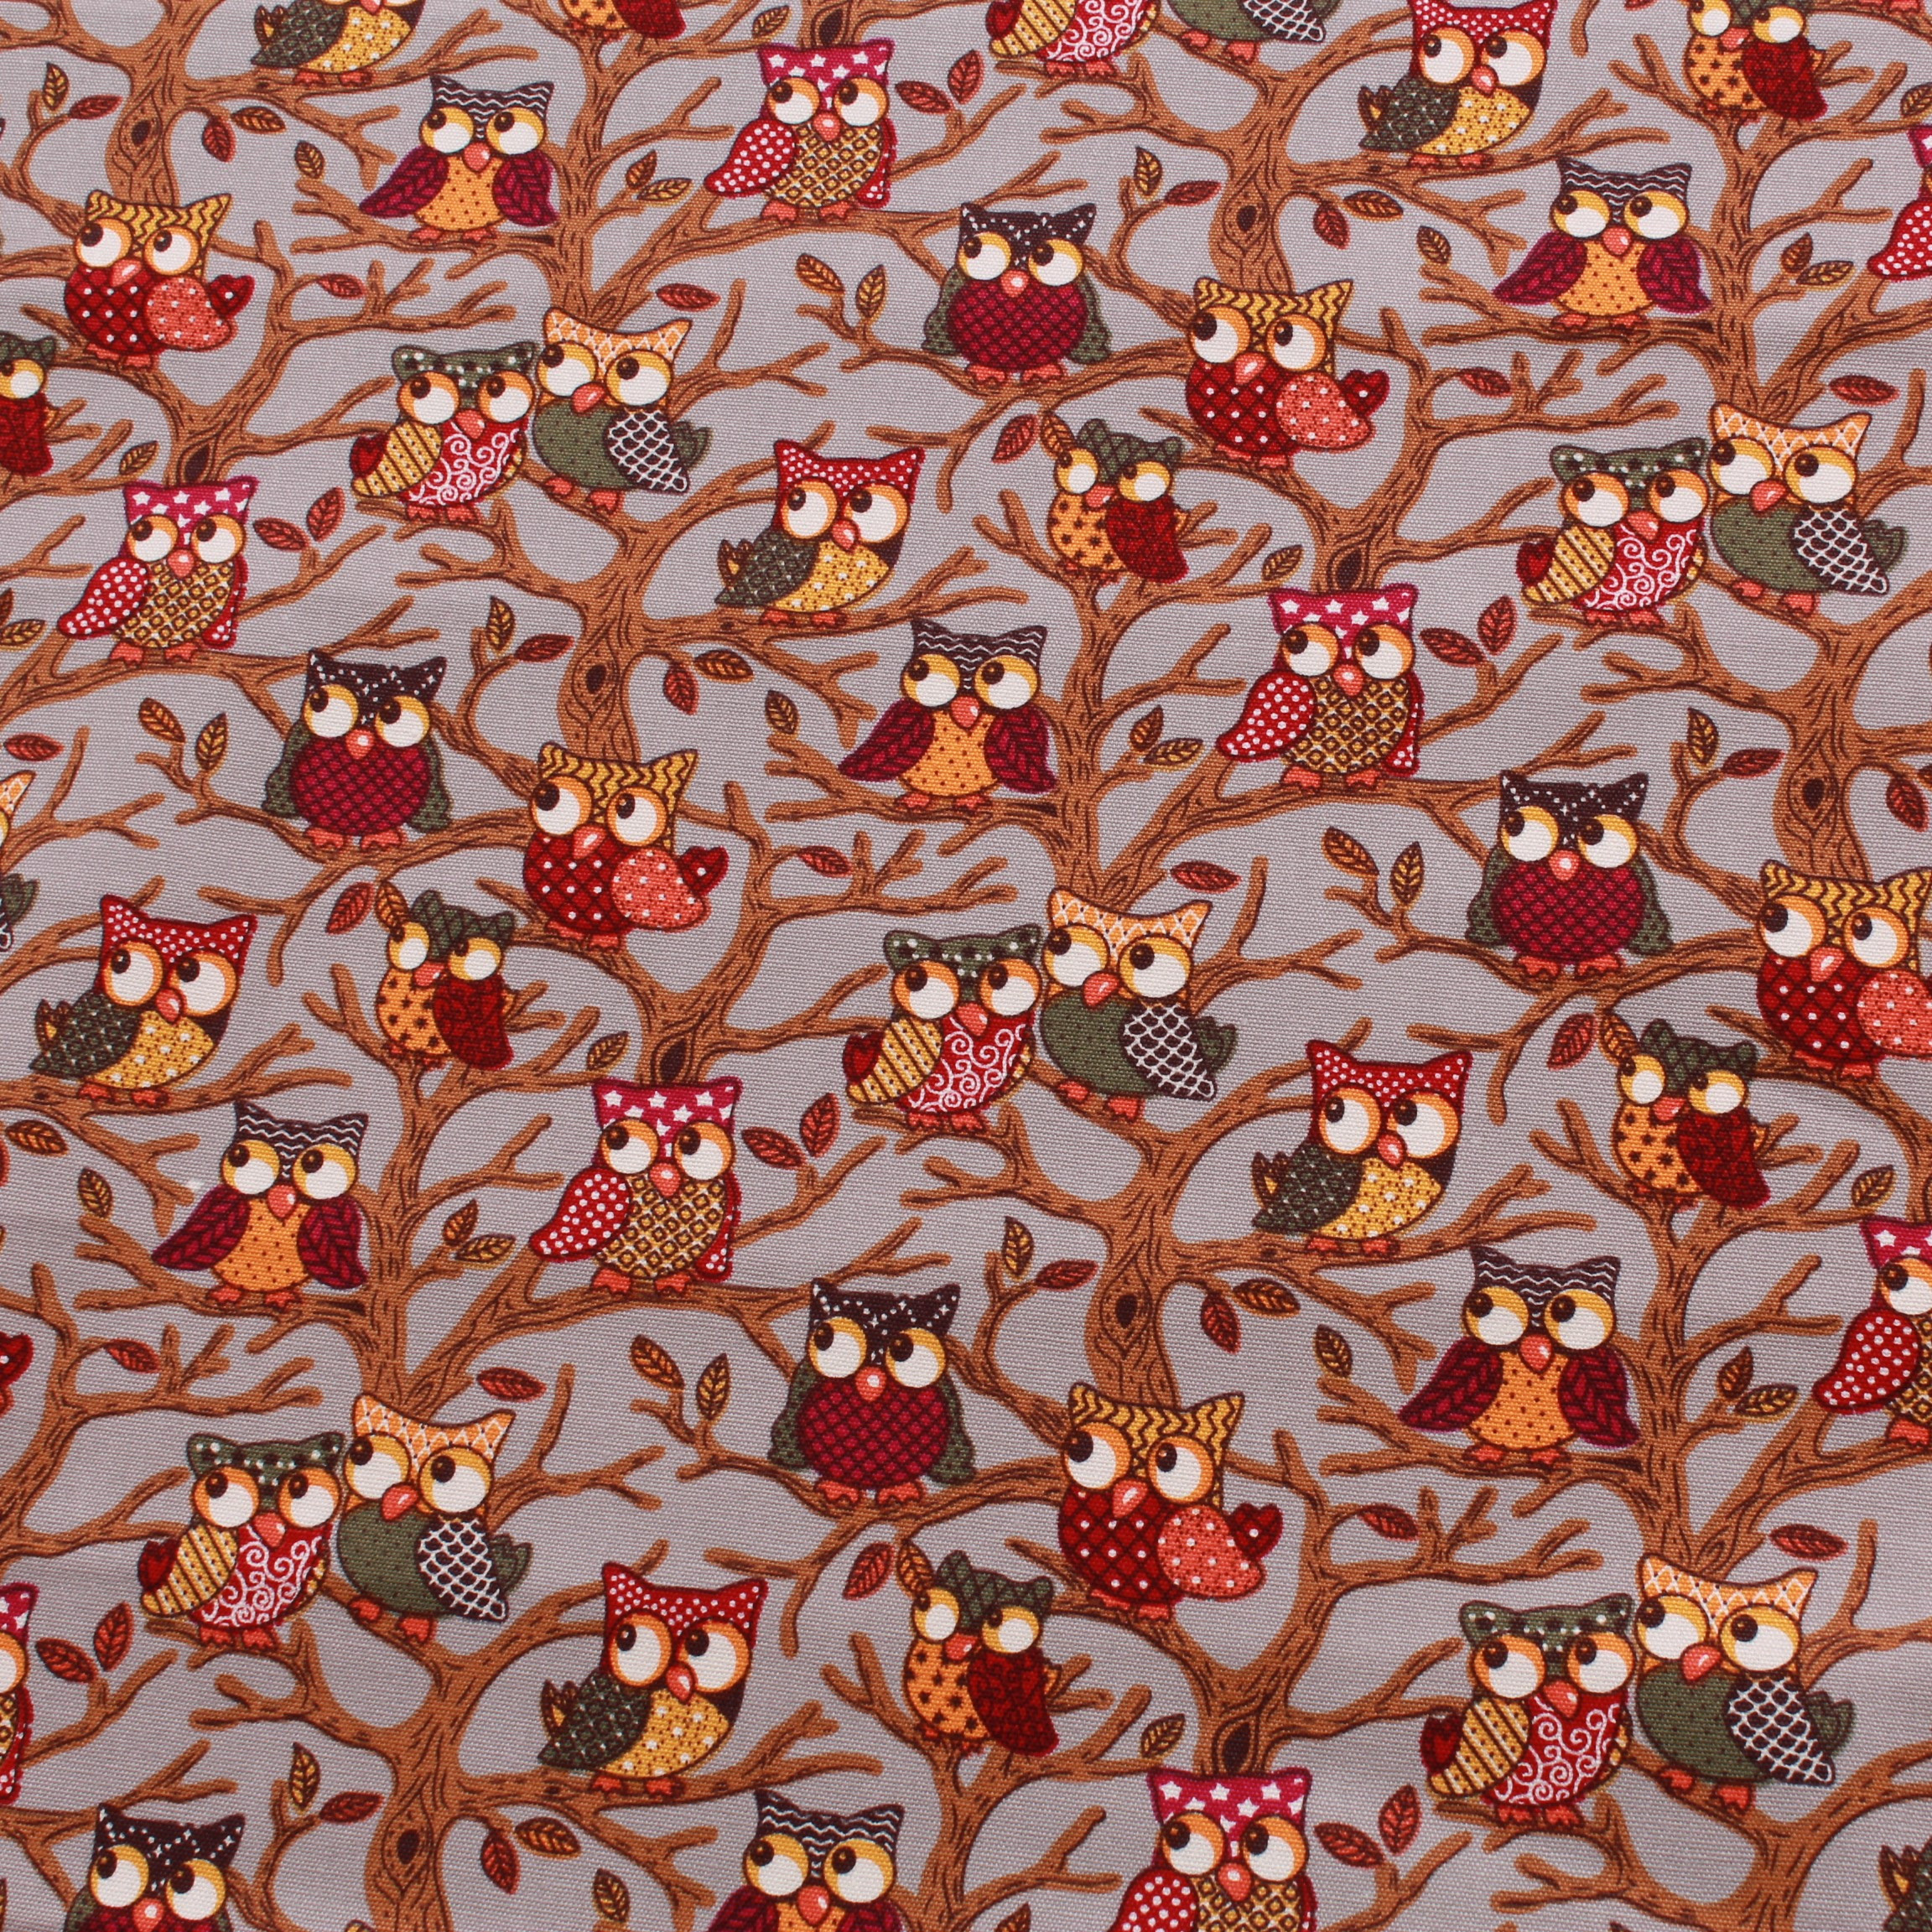 Pink Owls on Tree Branches Printed 100% Cotton Canvas Fabric. 